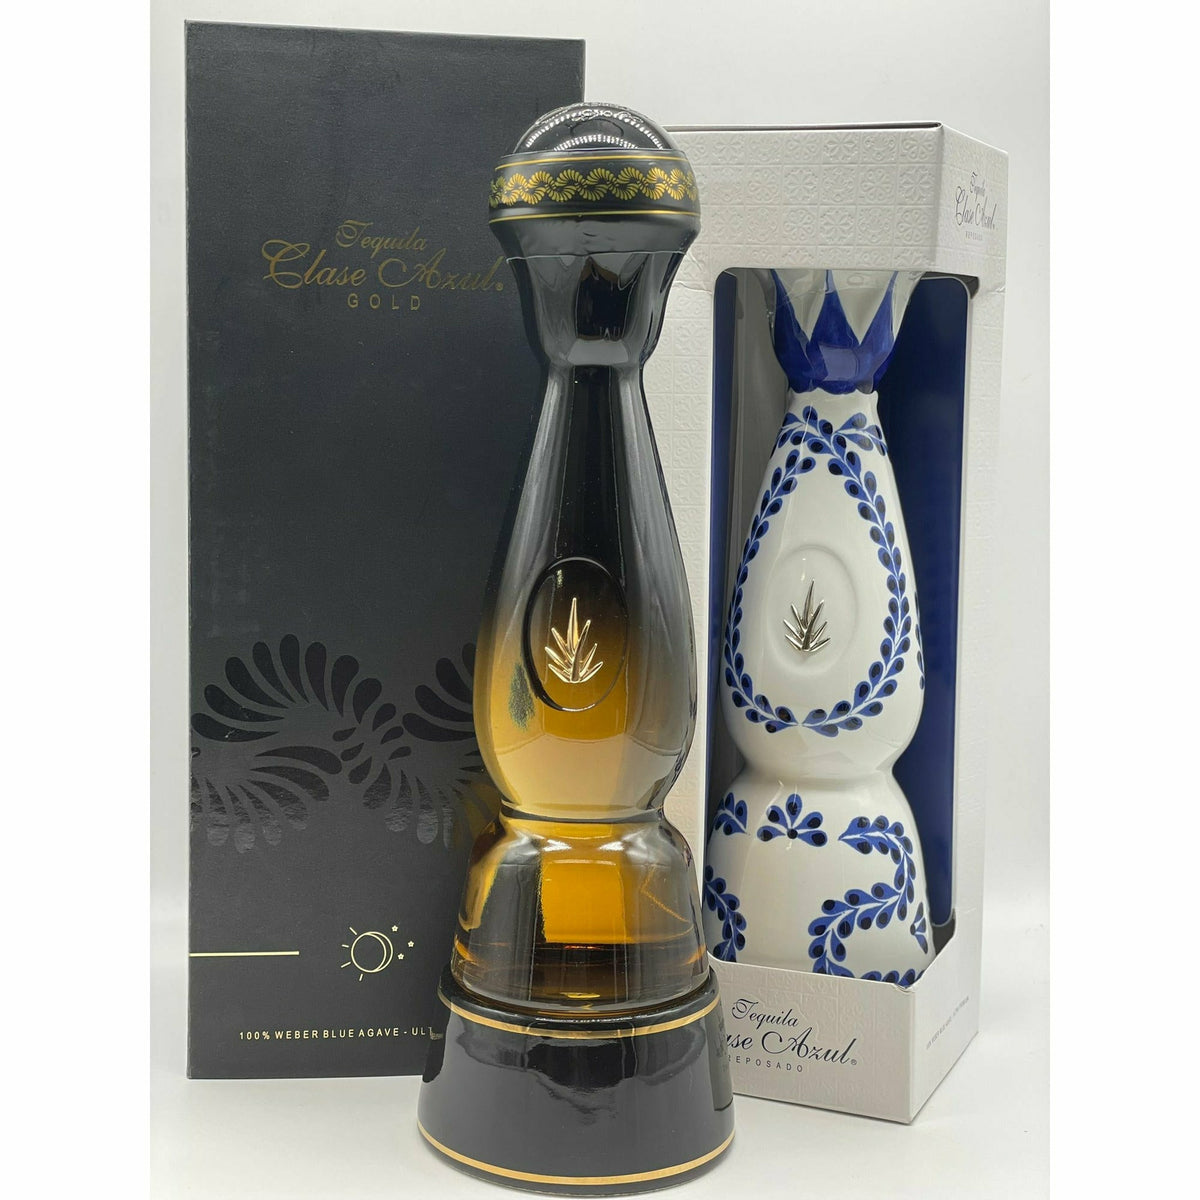 Clase Azul Gold Tequila: Luxurious Gold in a Bottle